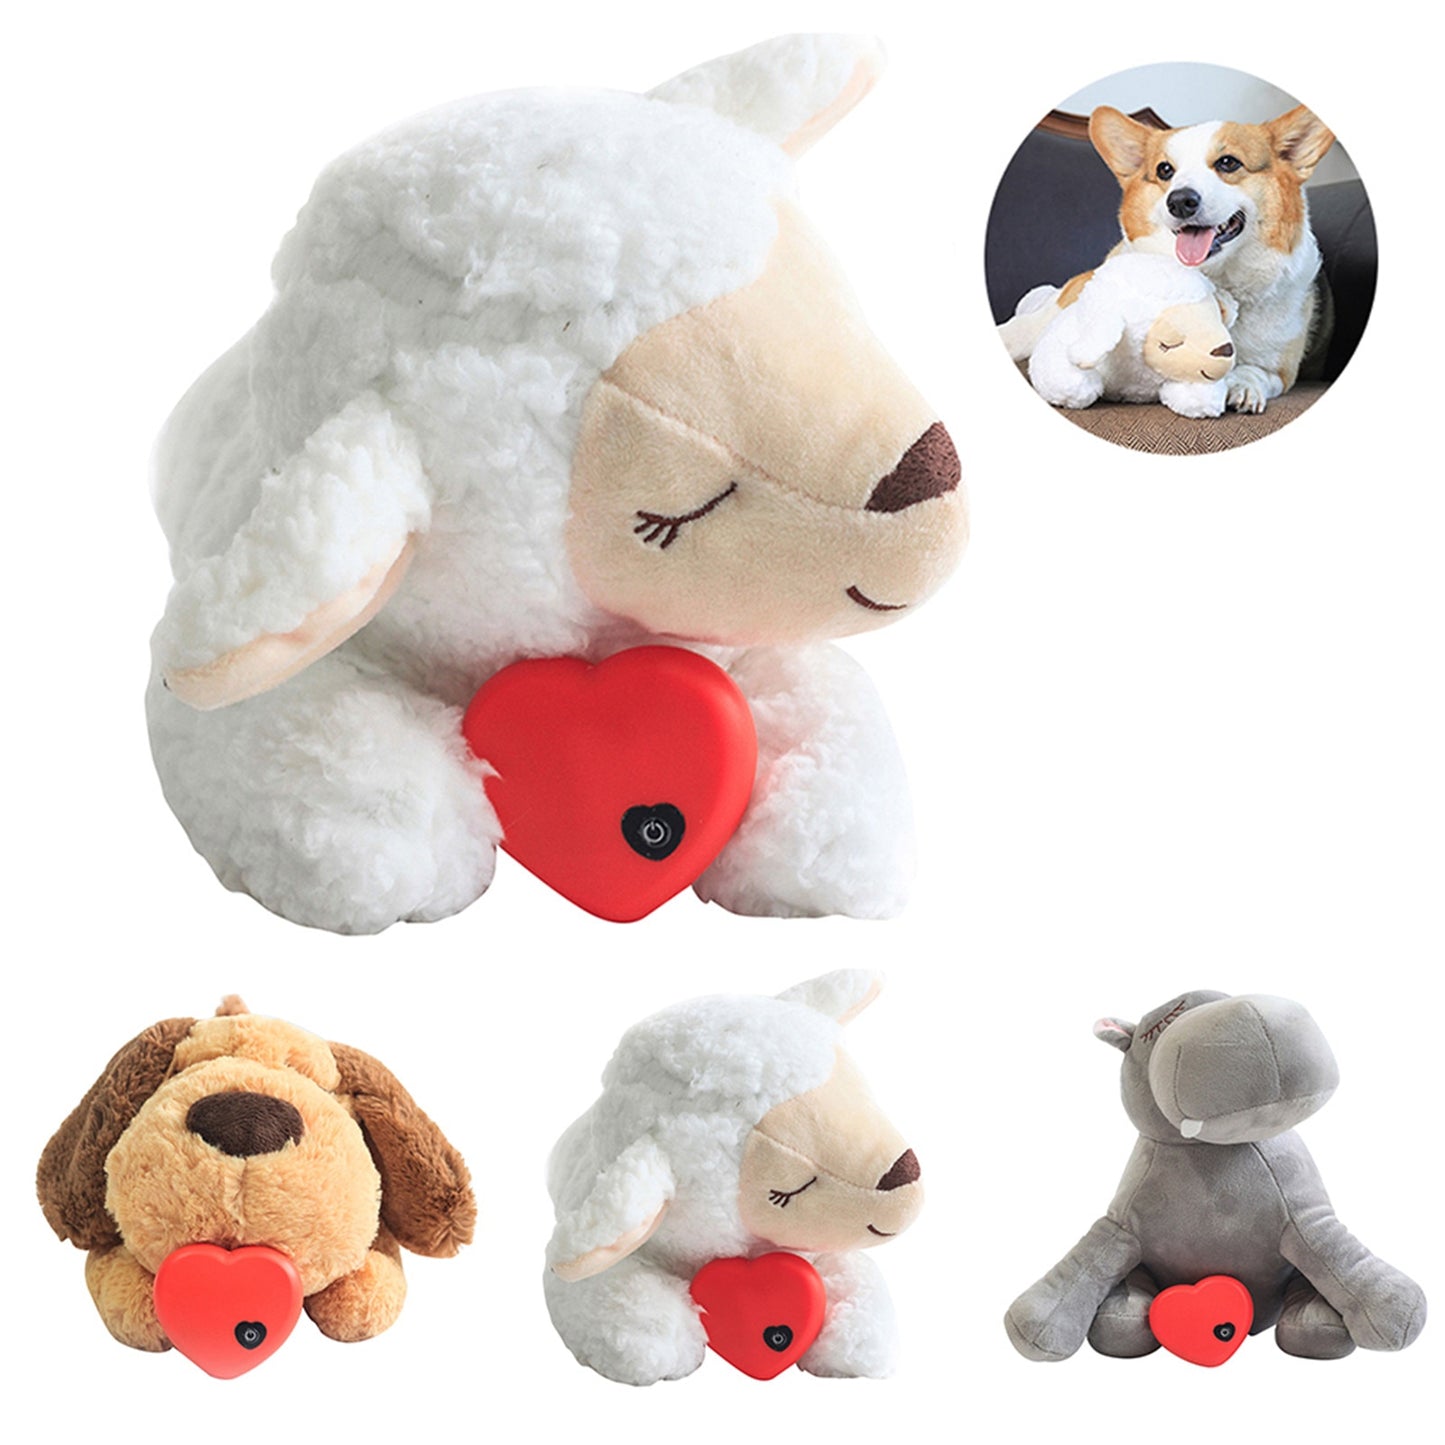 Calming plush for pets. The dog that will no longer make your puppy feel alone.